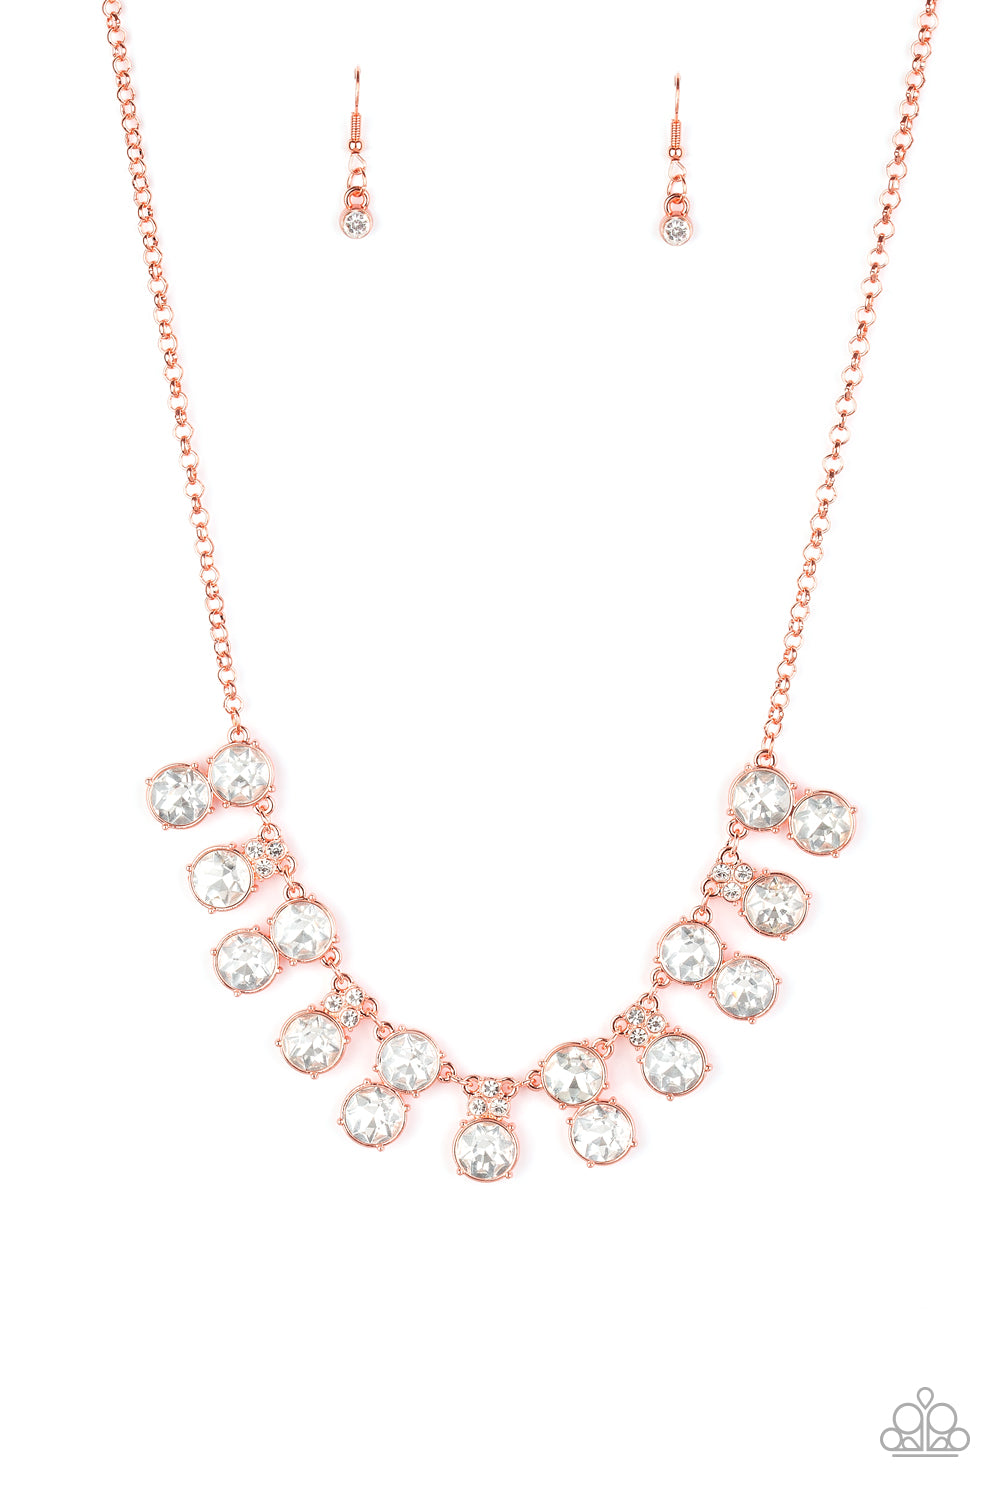 Paparazzi Accessories - Top Dollar Twinkle - Copper Necklace - Alies Bling Bar